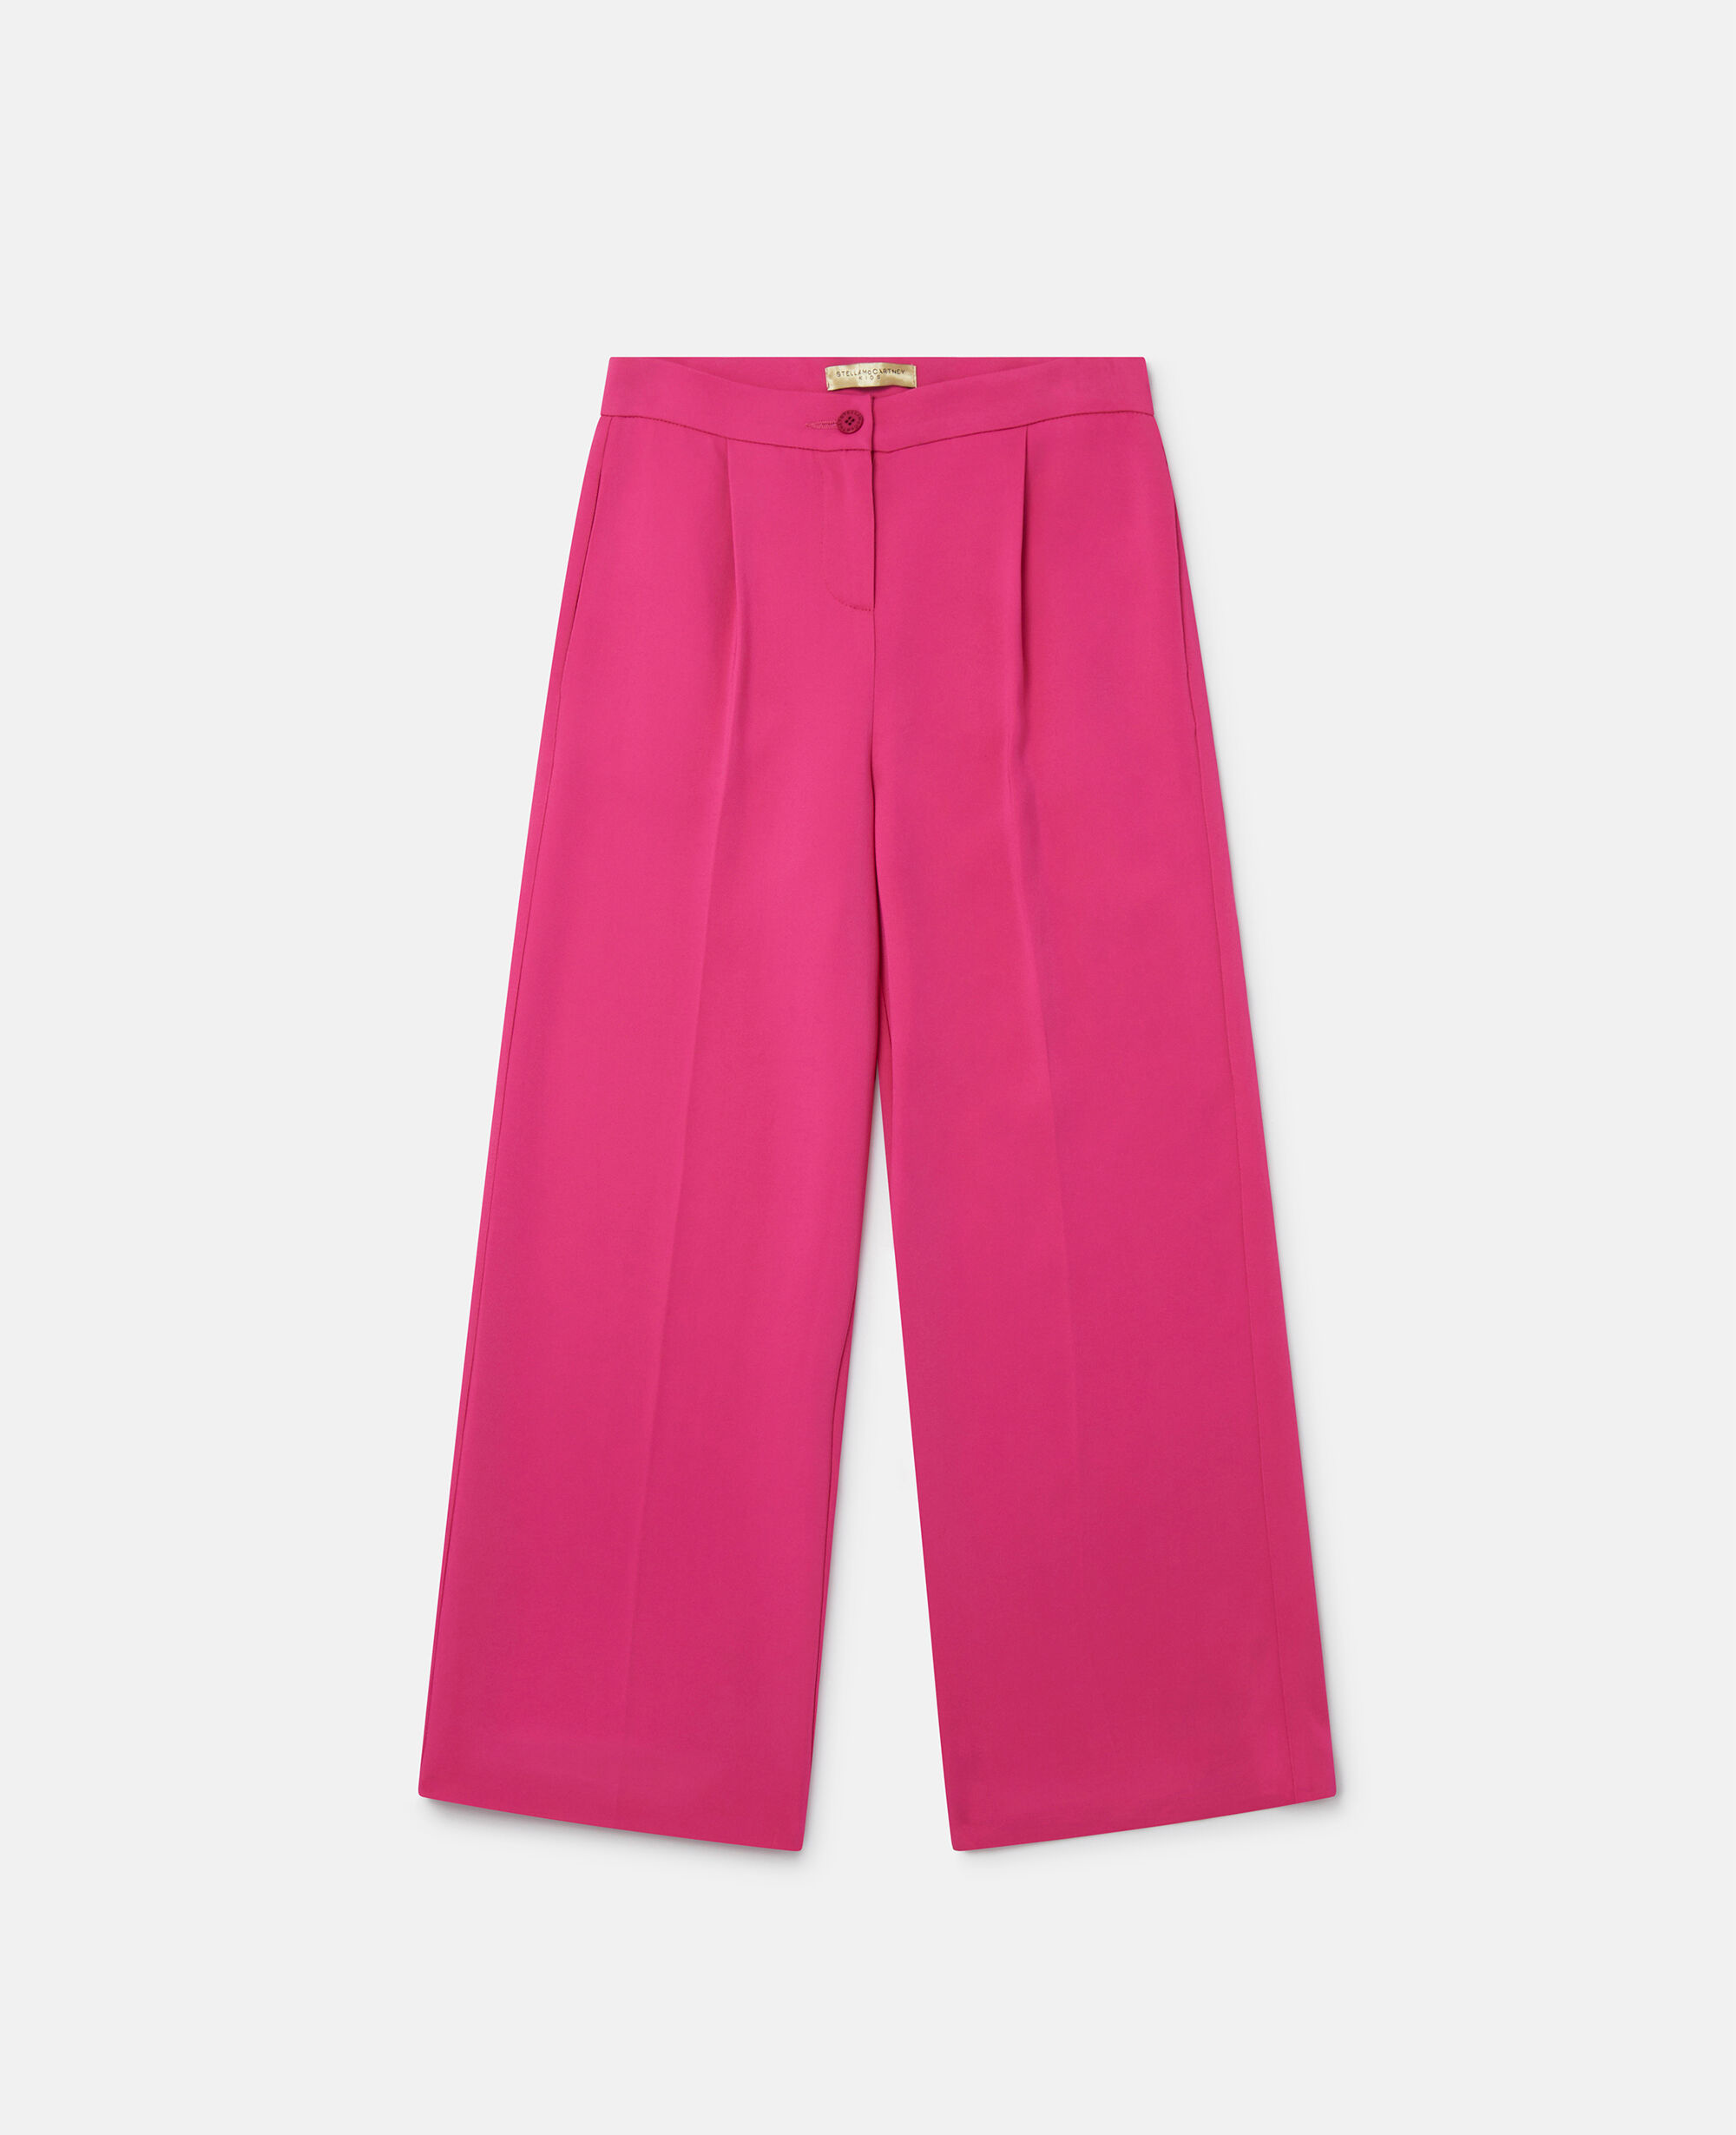 Phase Eight Adria Tailored Belted Trousers, Hot Pink | £119.00 | Buchanan  Galleries